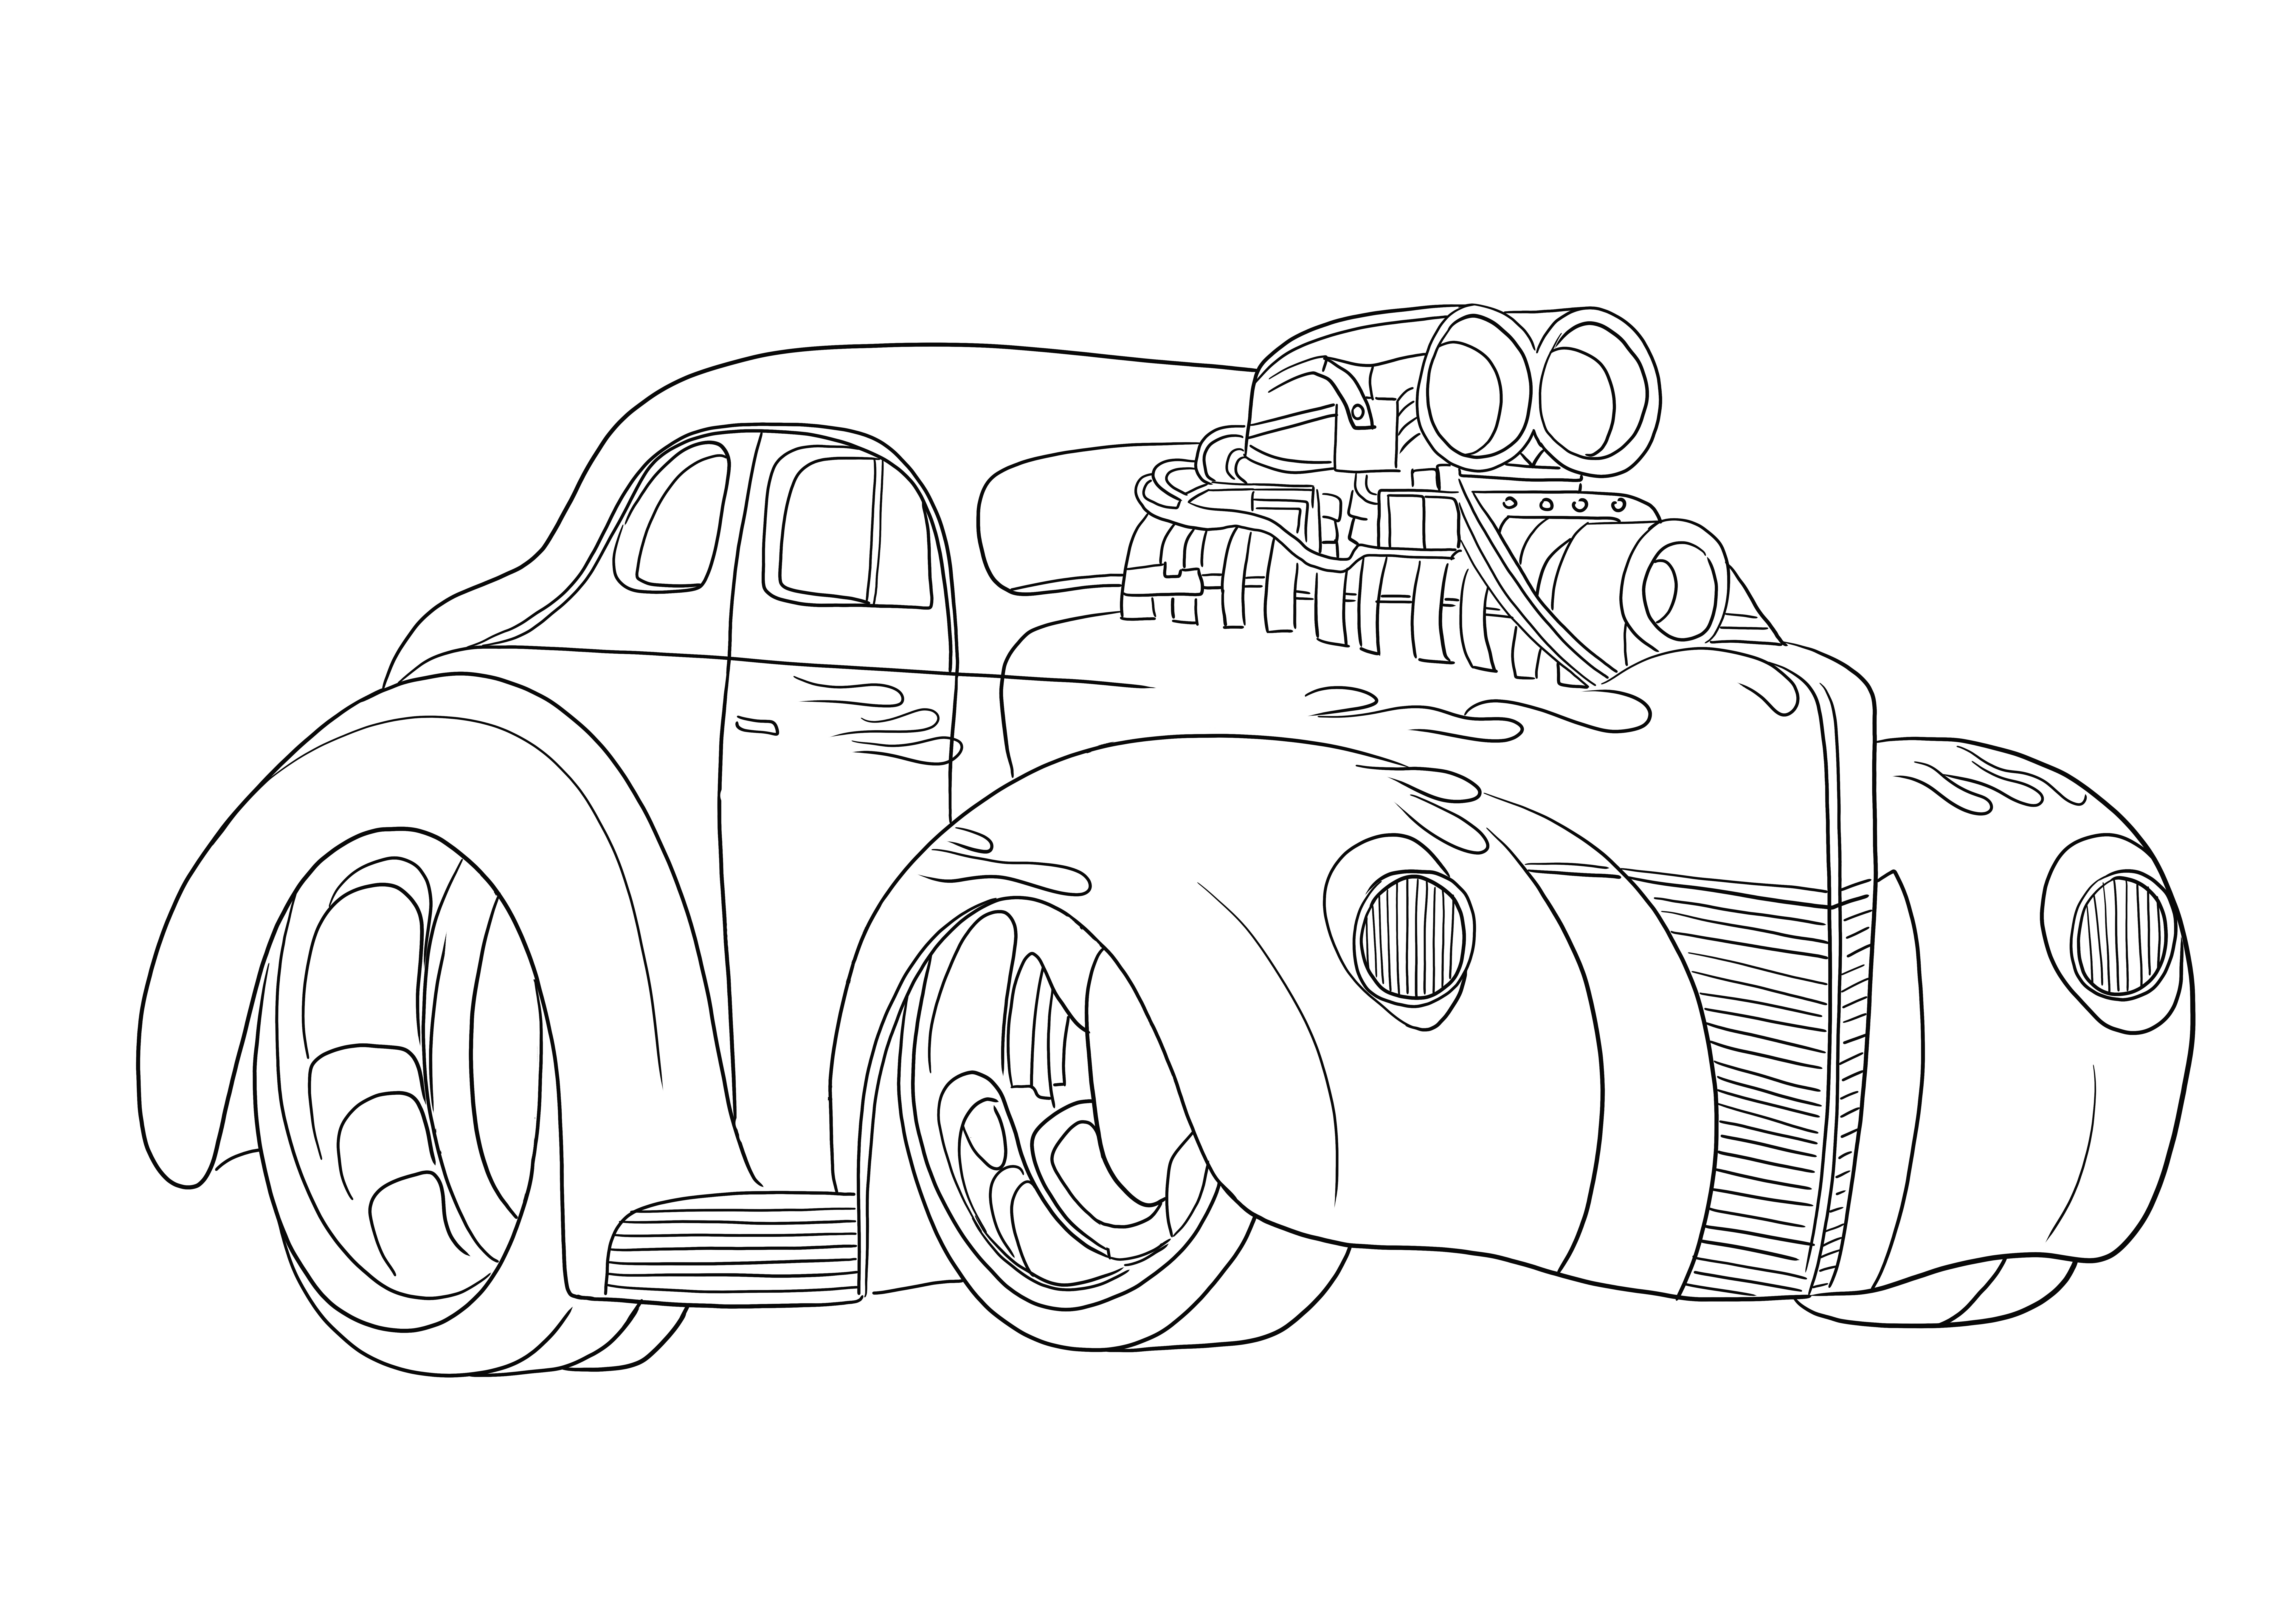 Our cool coloring sheet of Hot Wheels Hot Rod is free to print or download